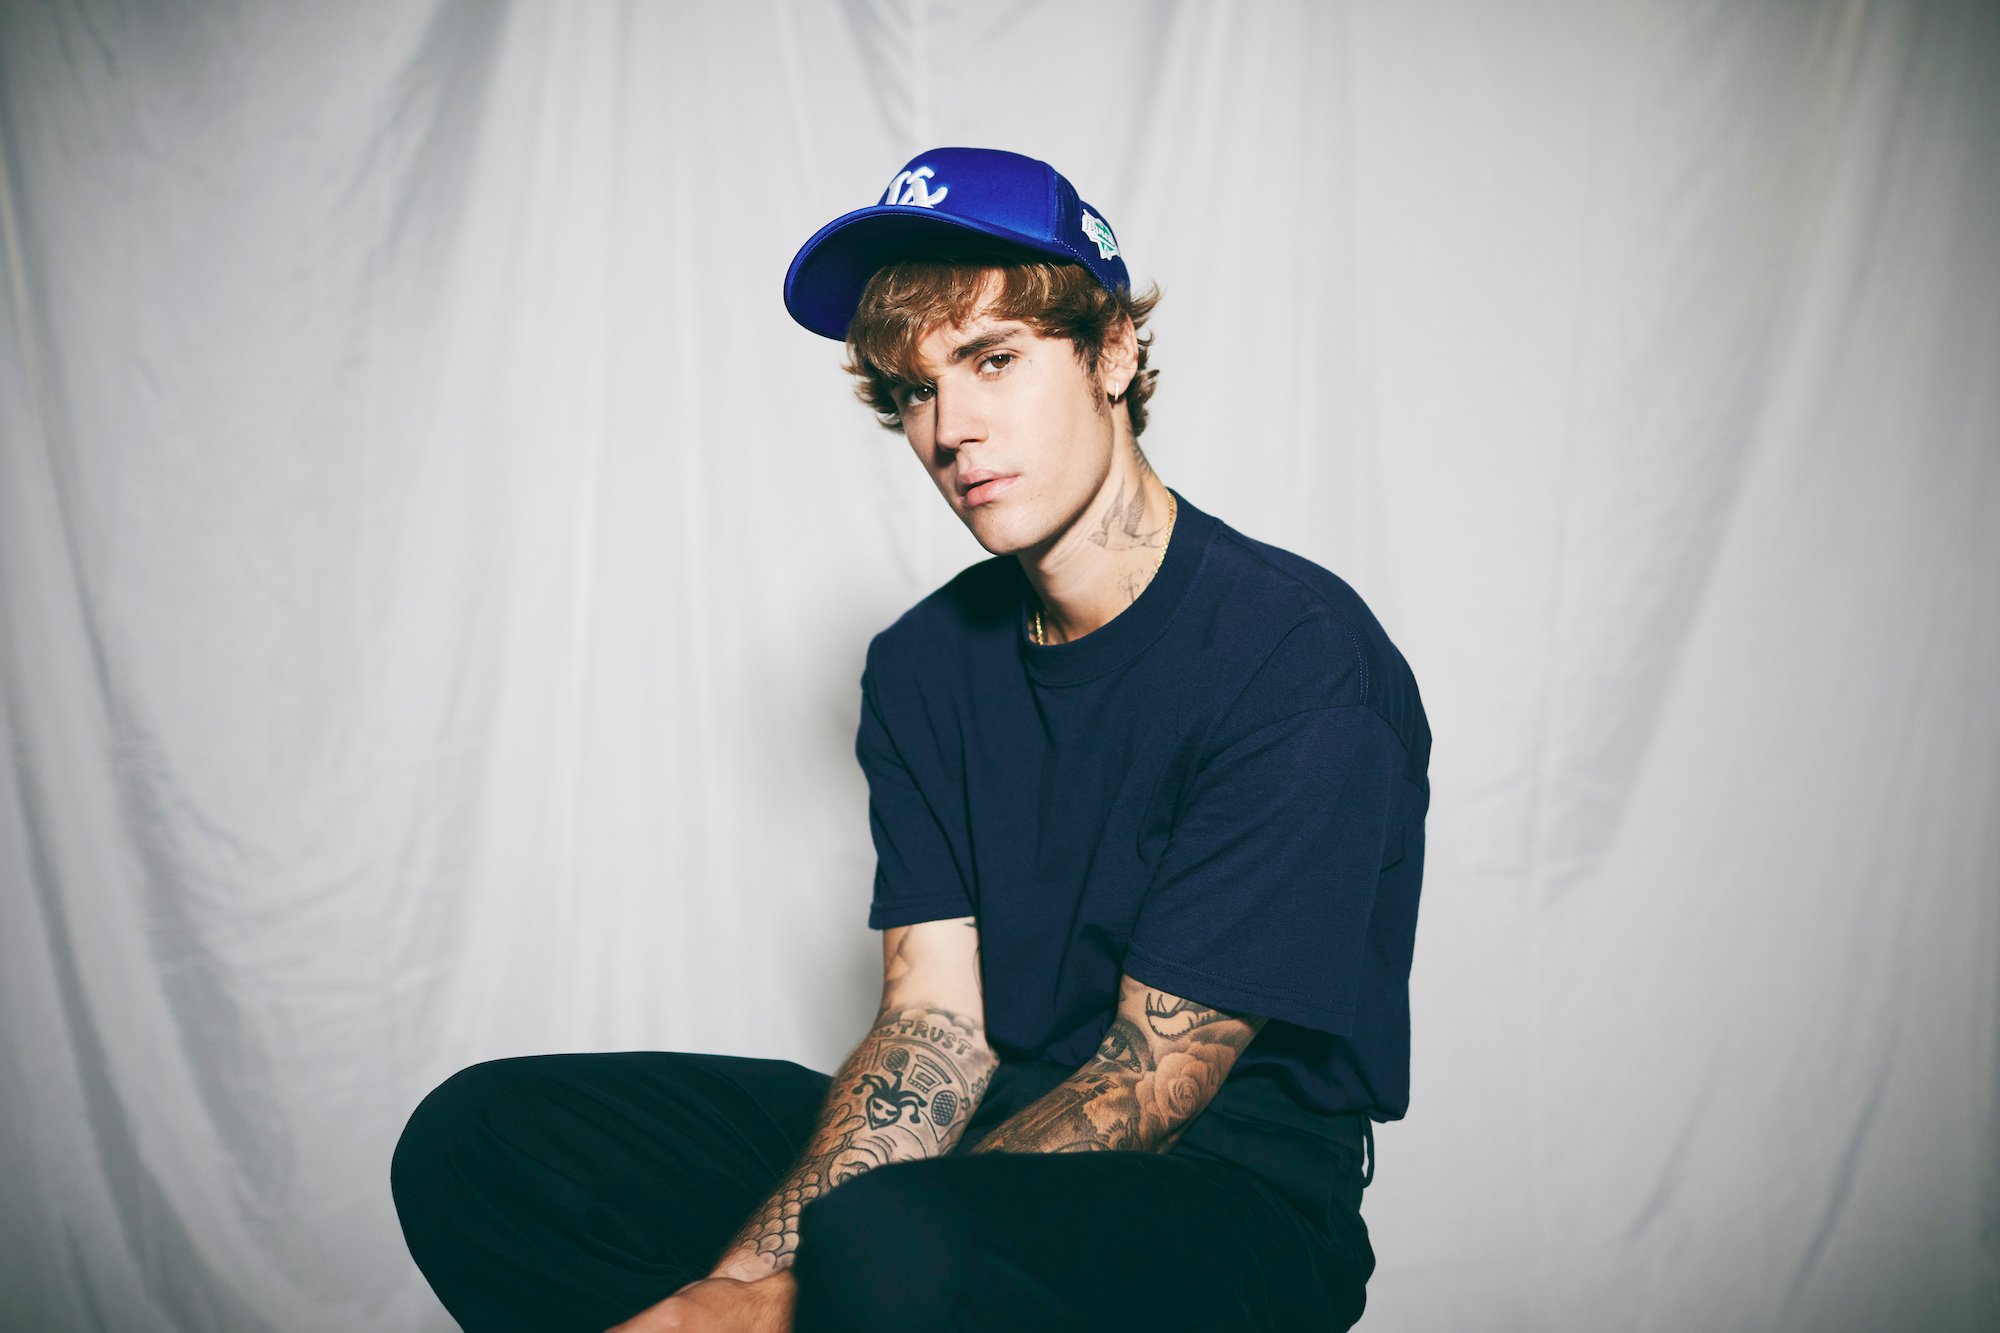 Justin Bieber during his New Studio Shoot in August 2020